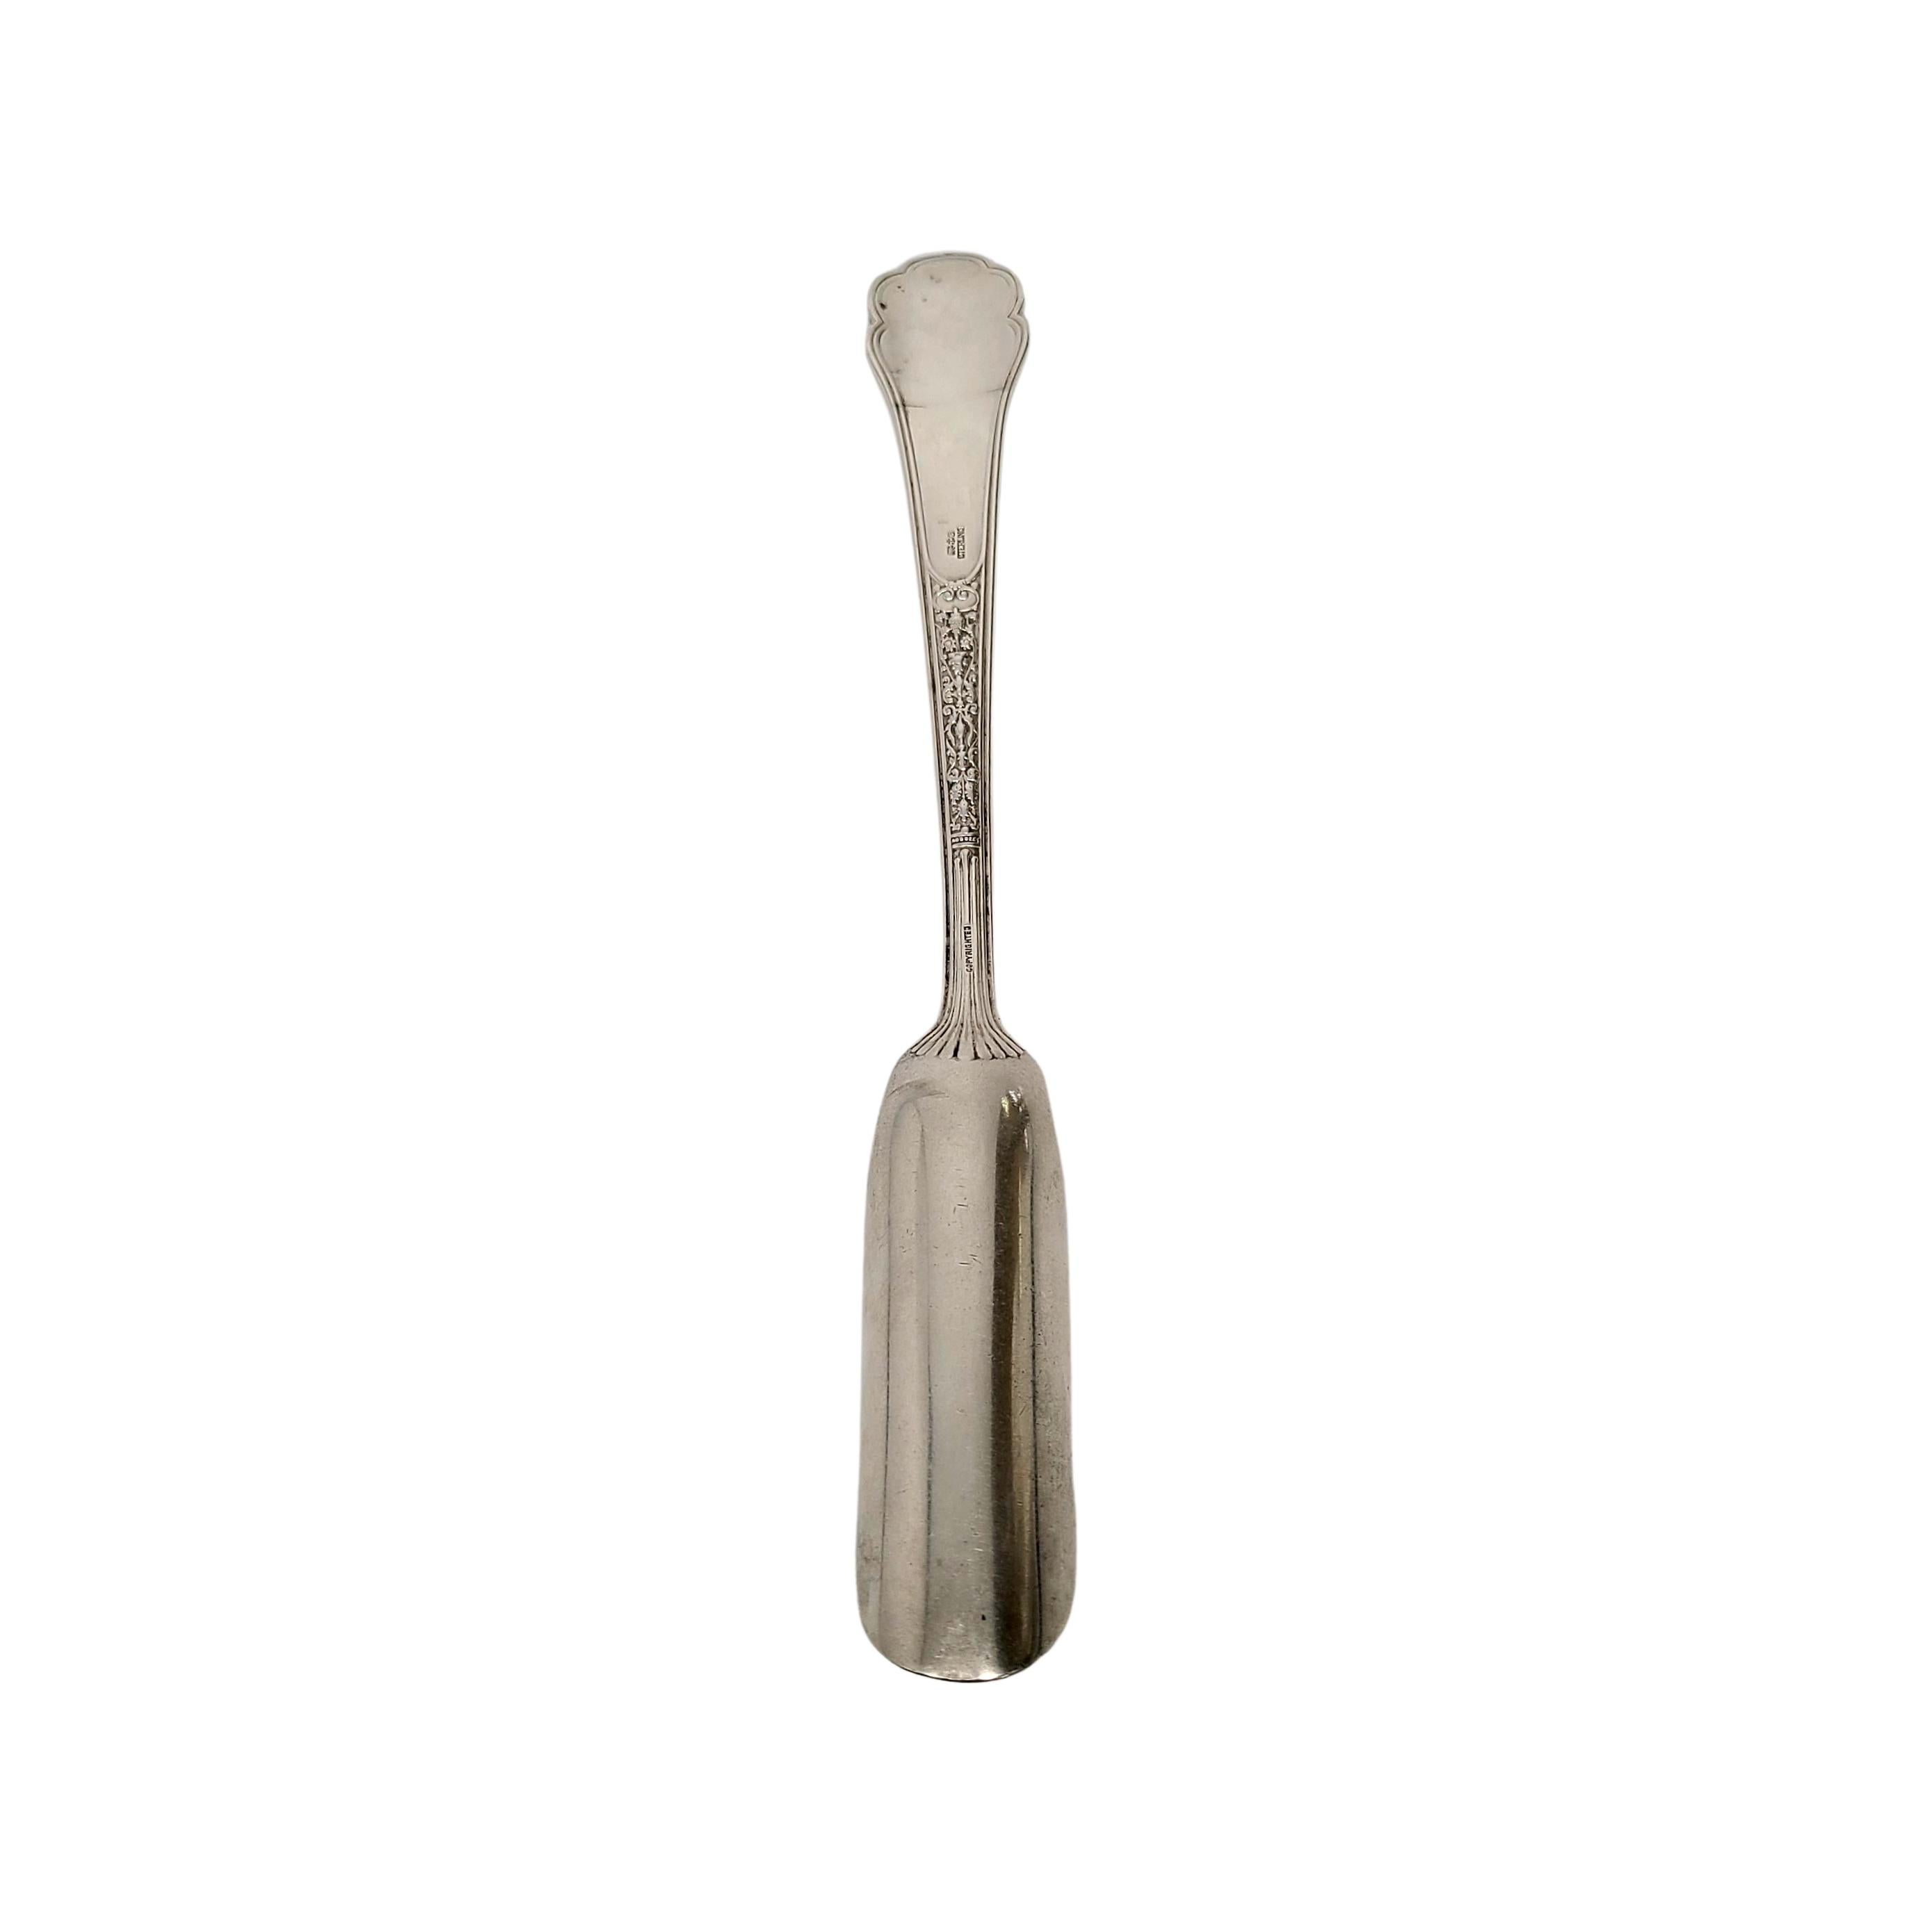 Sterling silver large cheese scoop by Gorham in the Medici Old pattern.

No monogram.

Gorham's Medici Old is a multi motif pattern designed in 1880. Named for the time of Lorenzo de Medici, the pattern depicts scenes of social and intellectual life